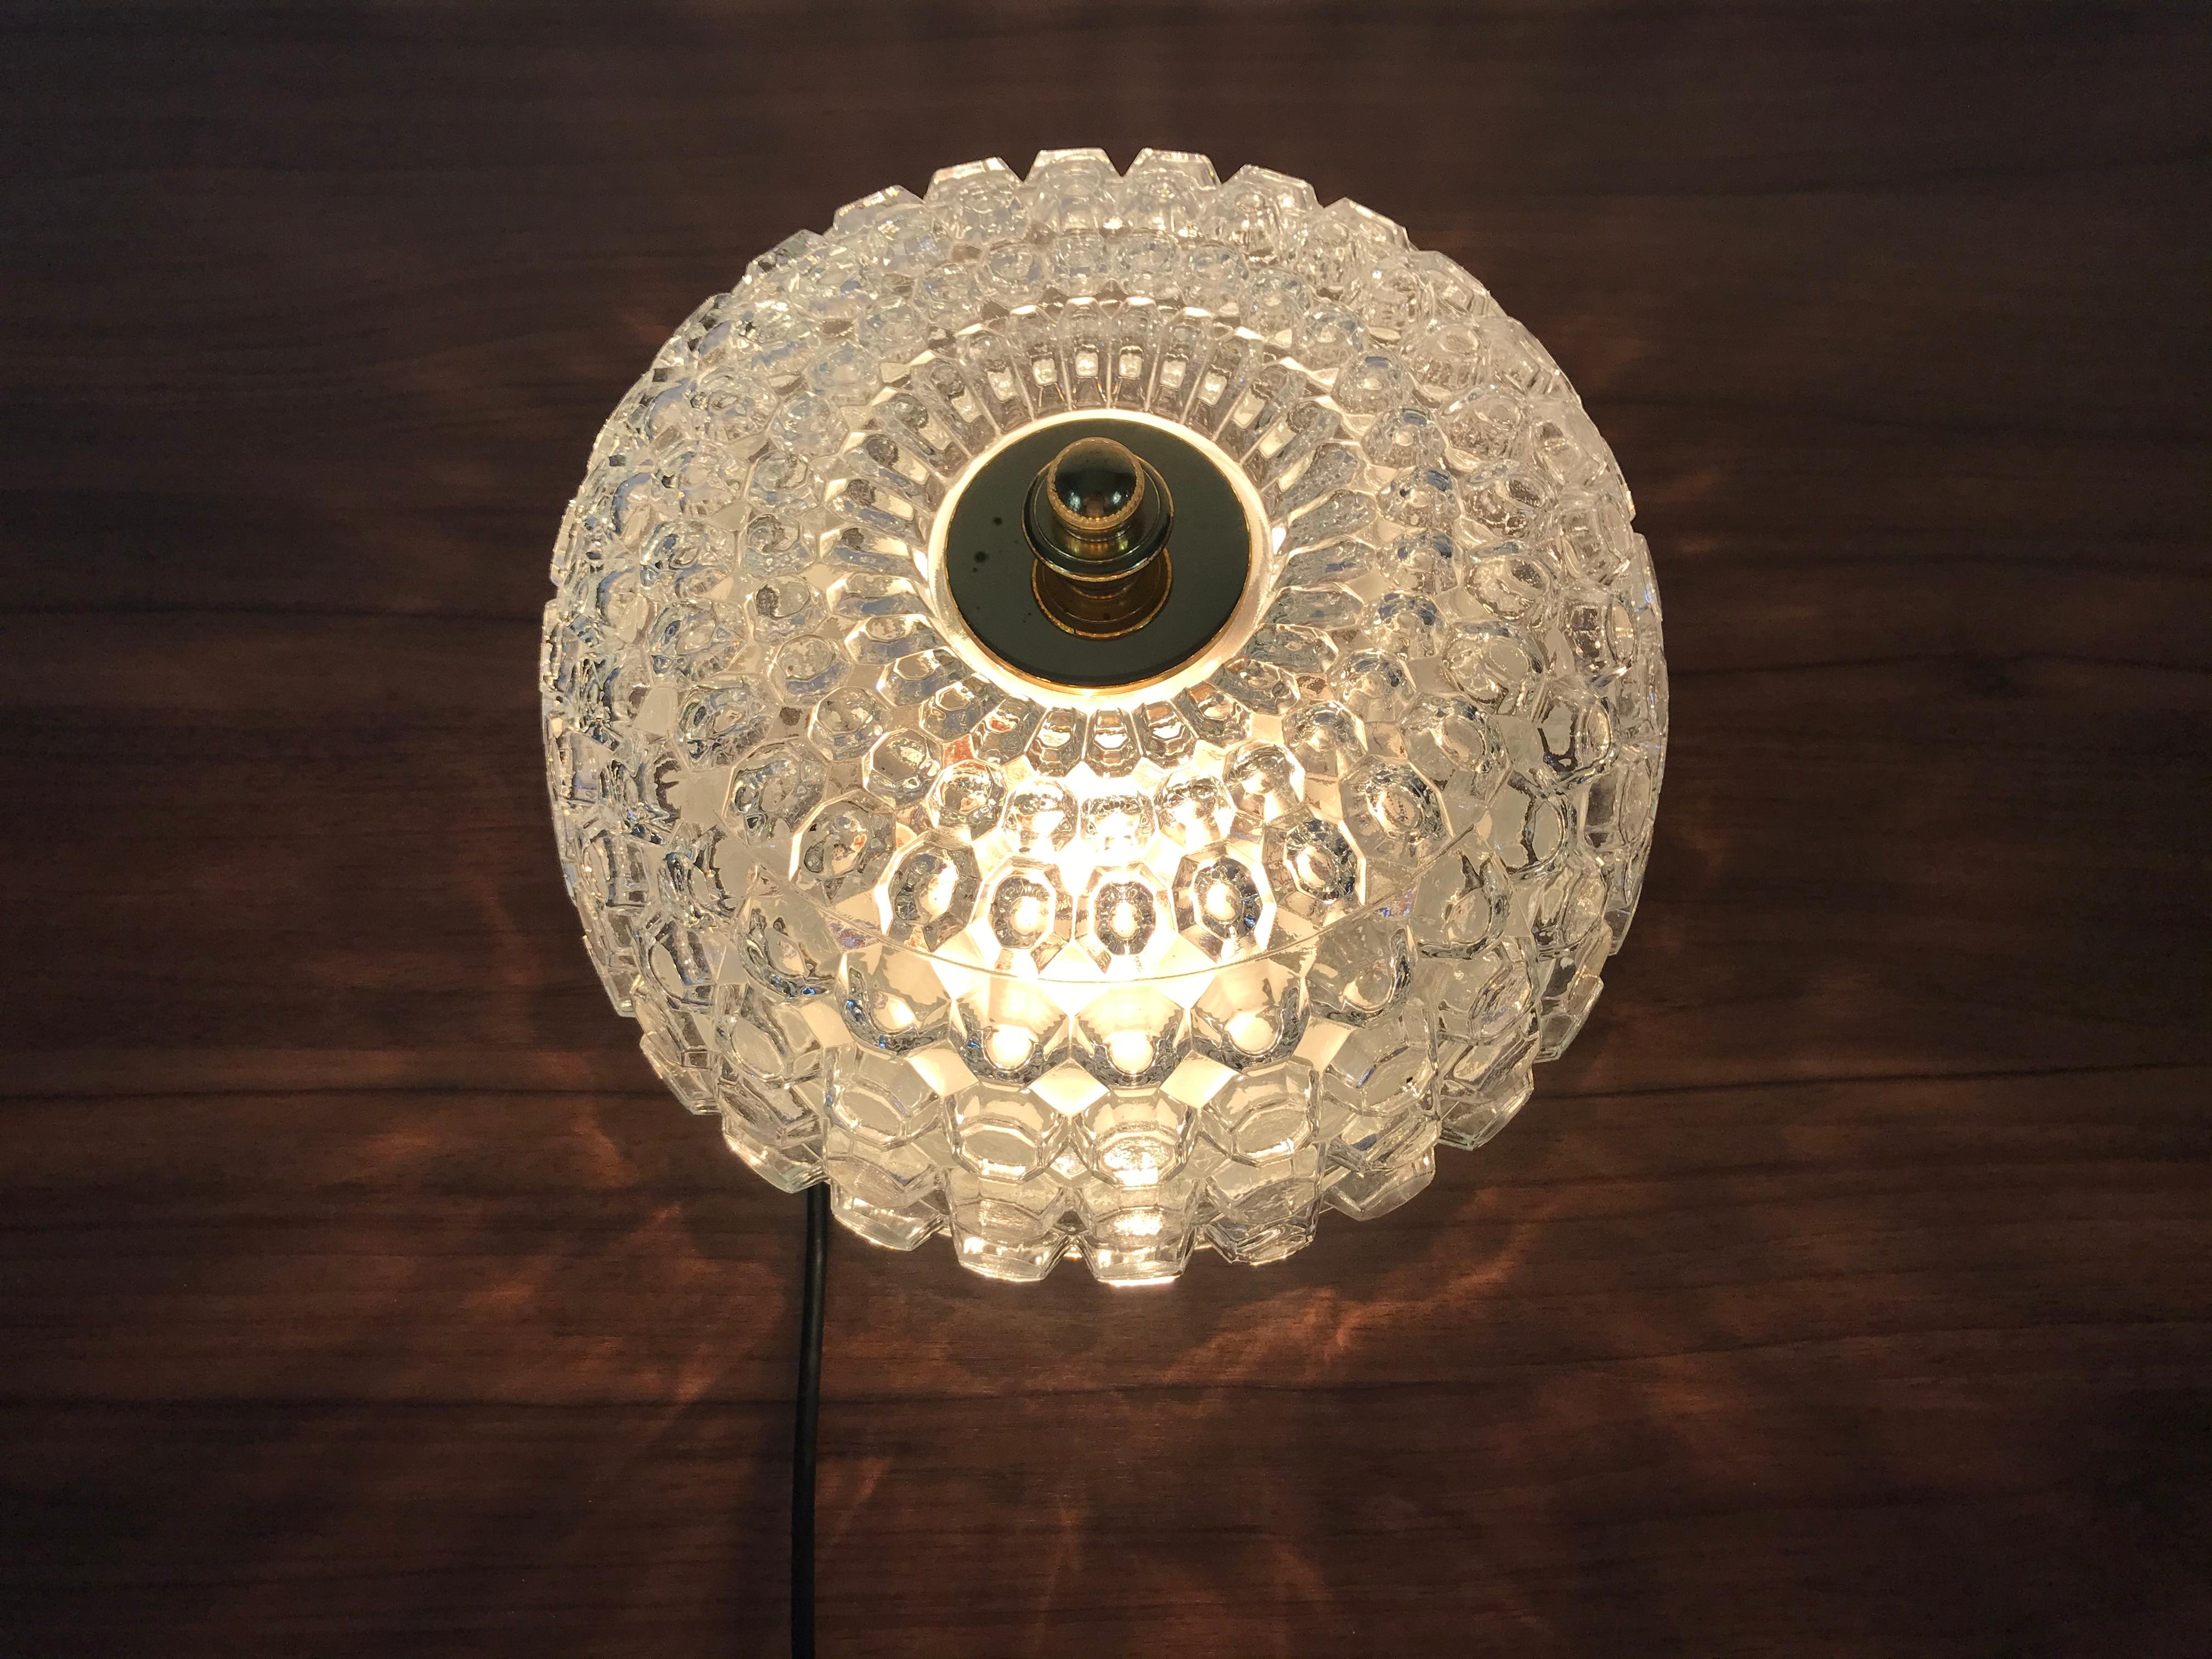 Flush mount by Glashütte Limburg made in Germany in the 1960s. It is fascinating with its crystal glass, which is typical for the German brand. The round top of the light is made of brass.

The light requires two E27 light bulbs.